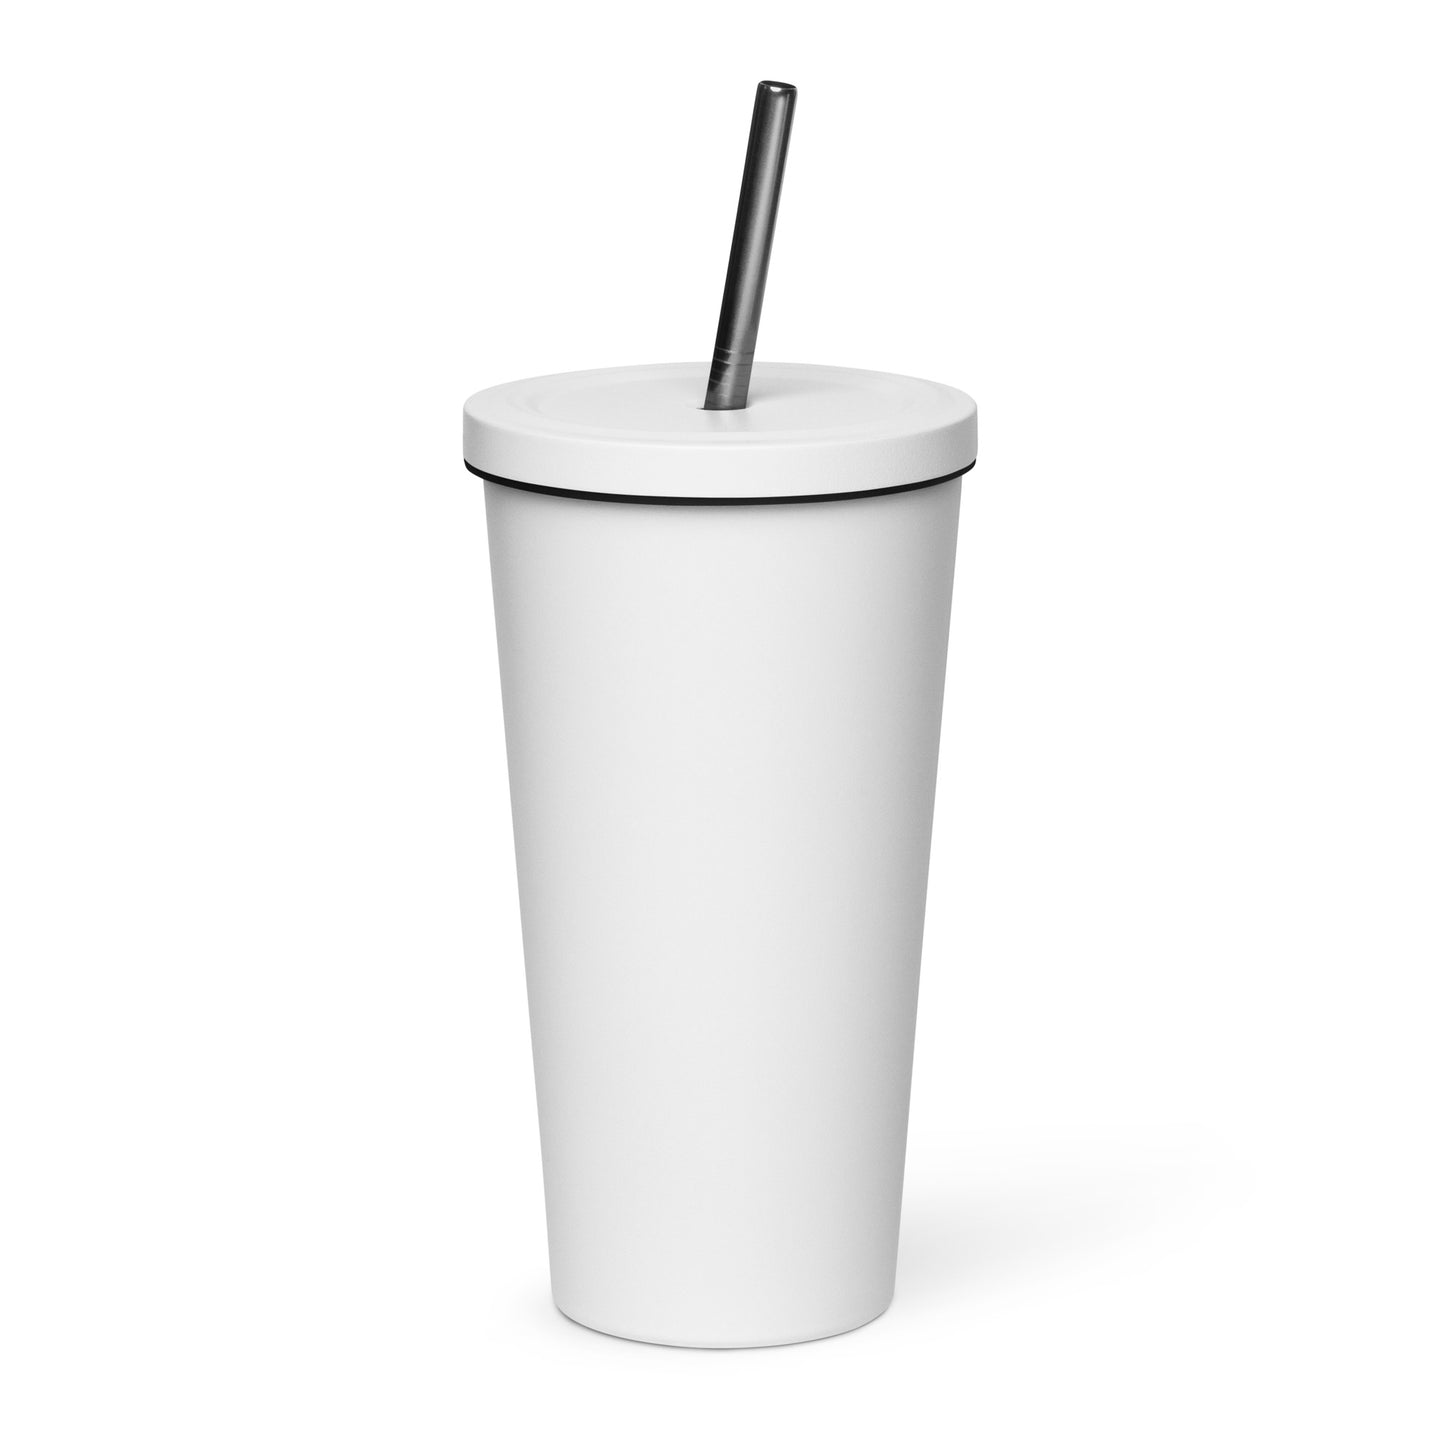 Insulated tumbler with a straw- Crazy Horse 2 - offthespeed